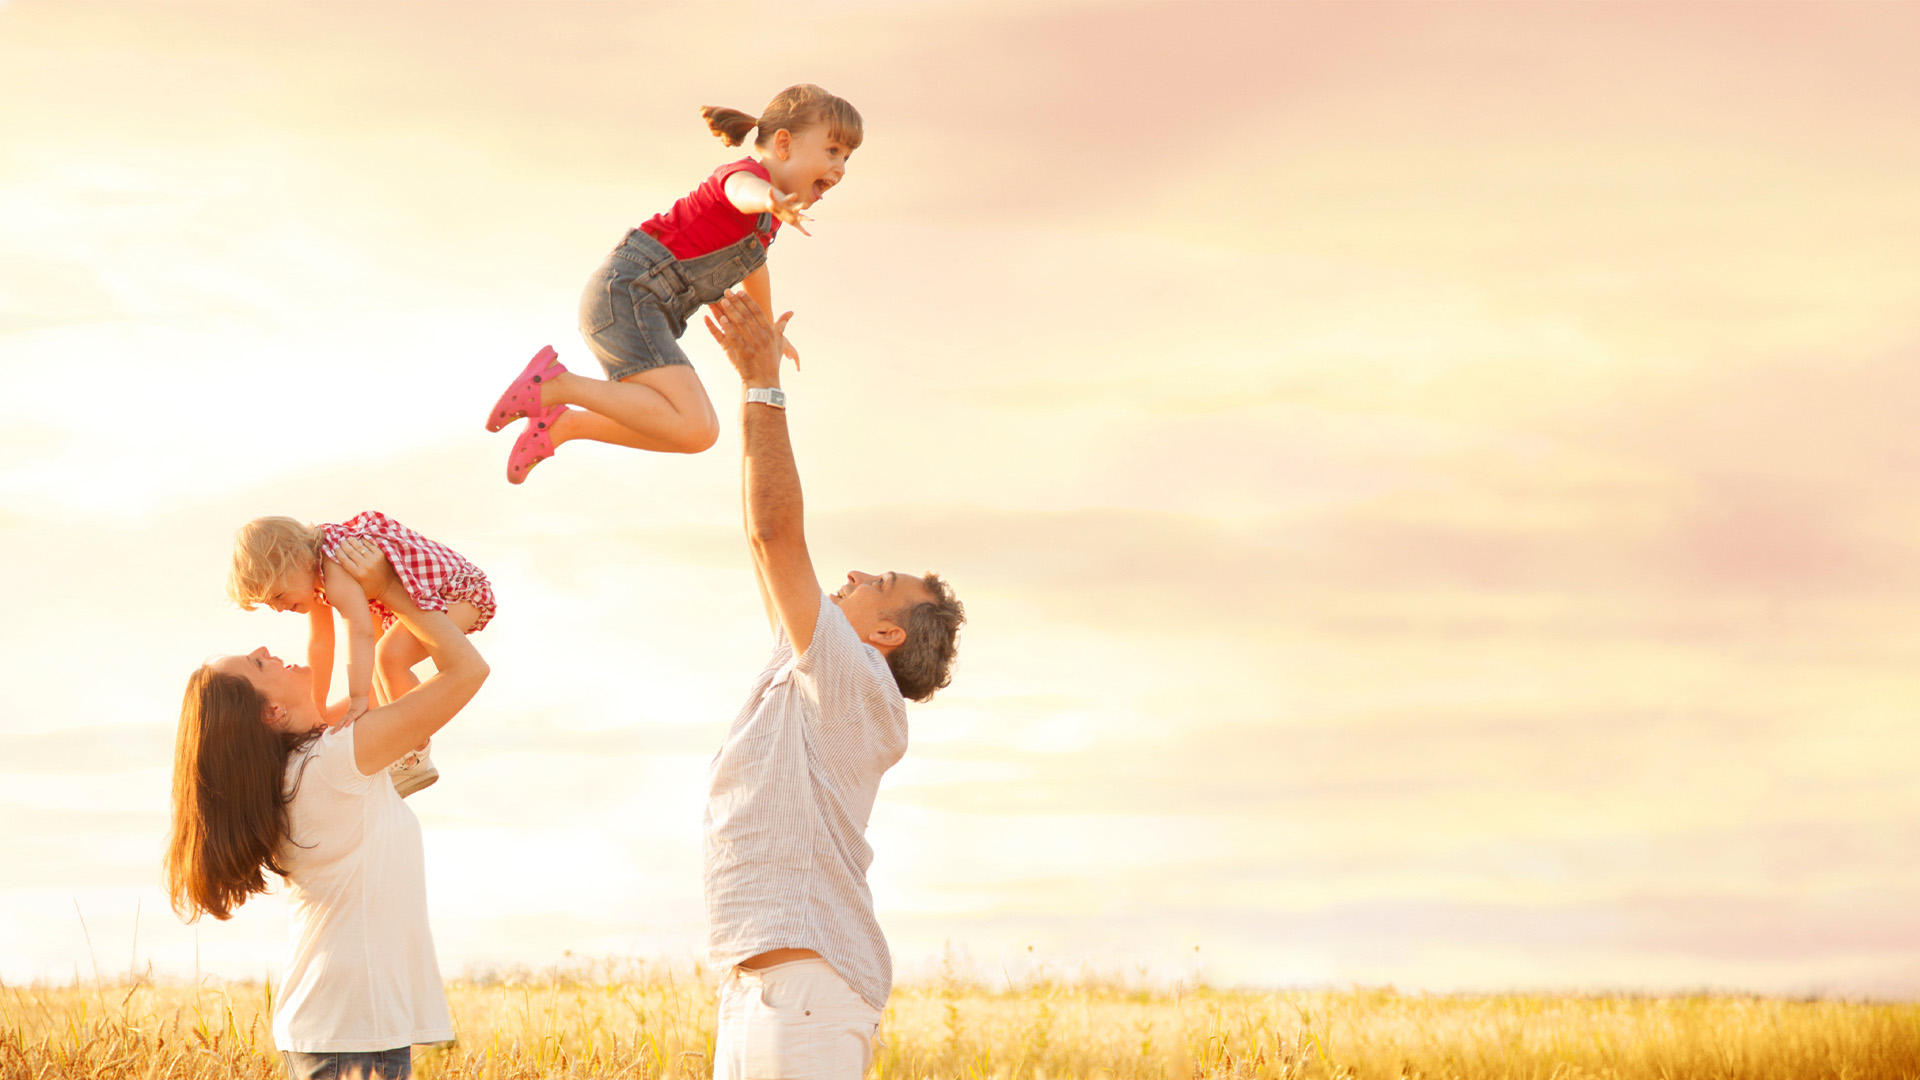 Parents tossing their children into the air, laughing, in a wheat field